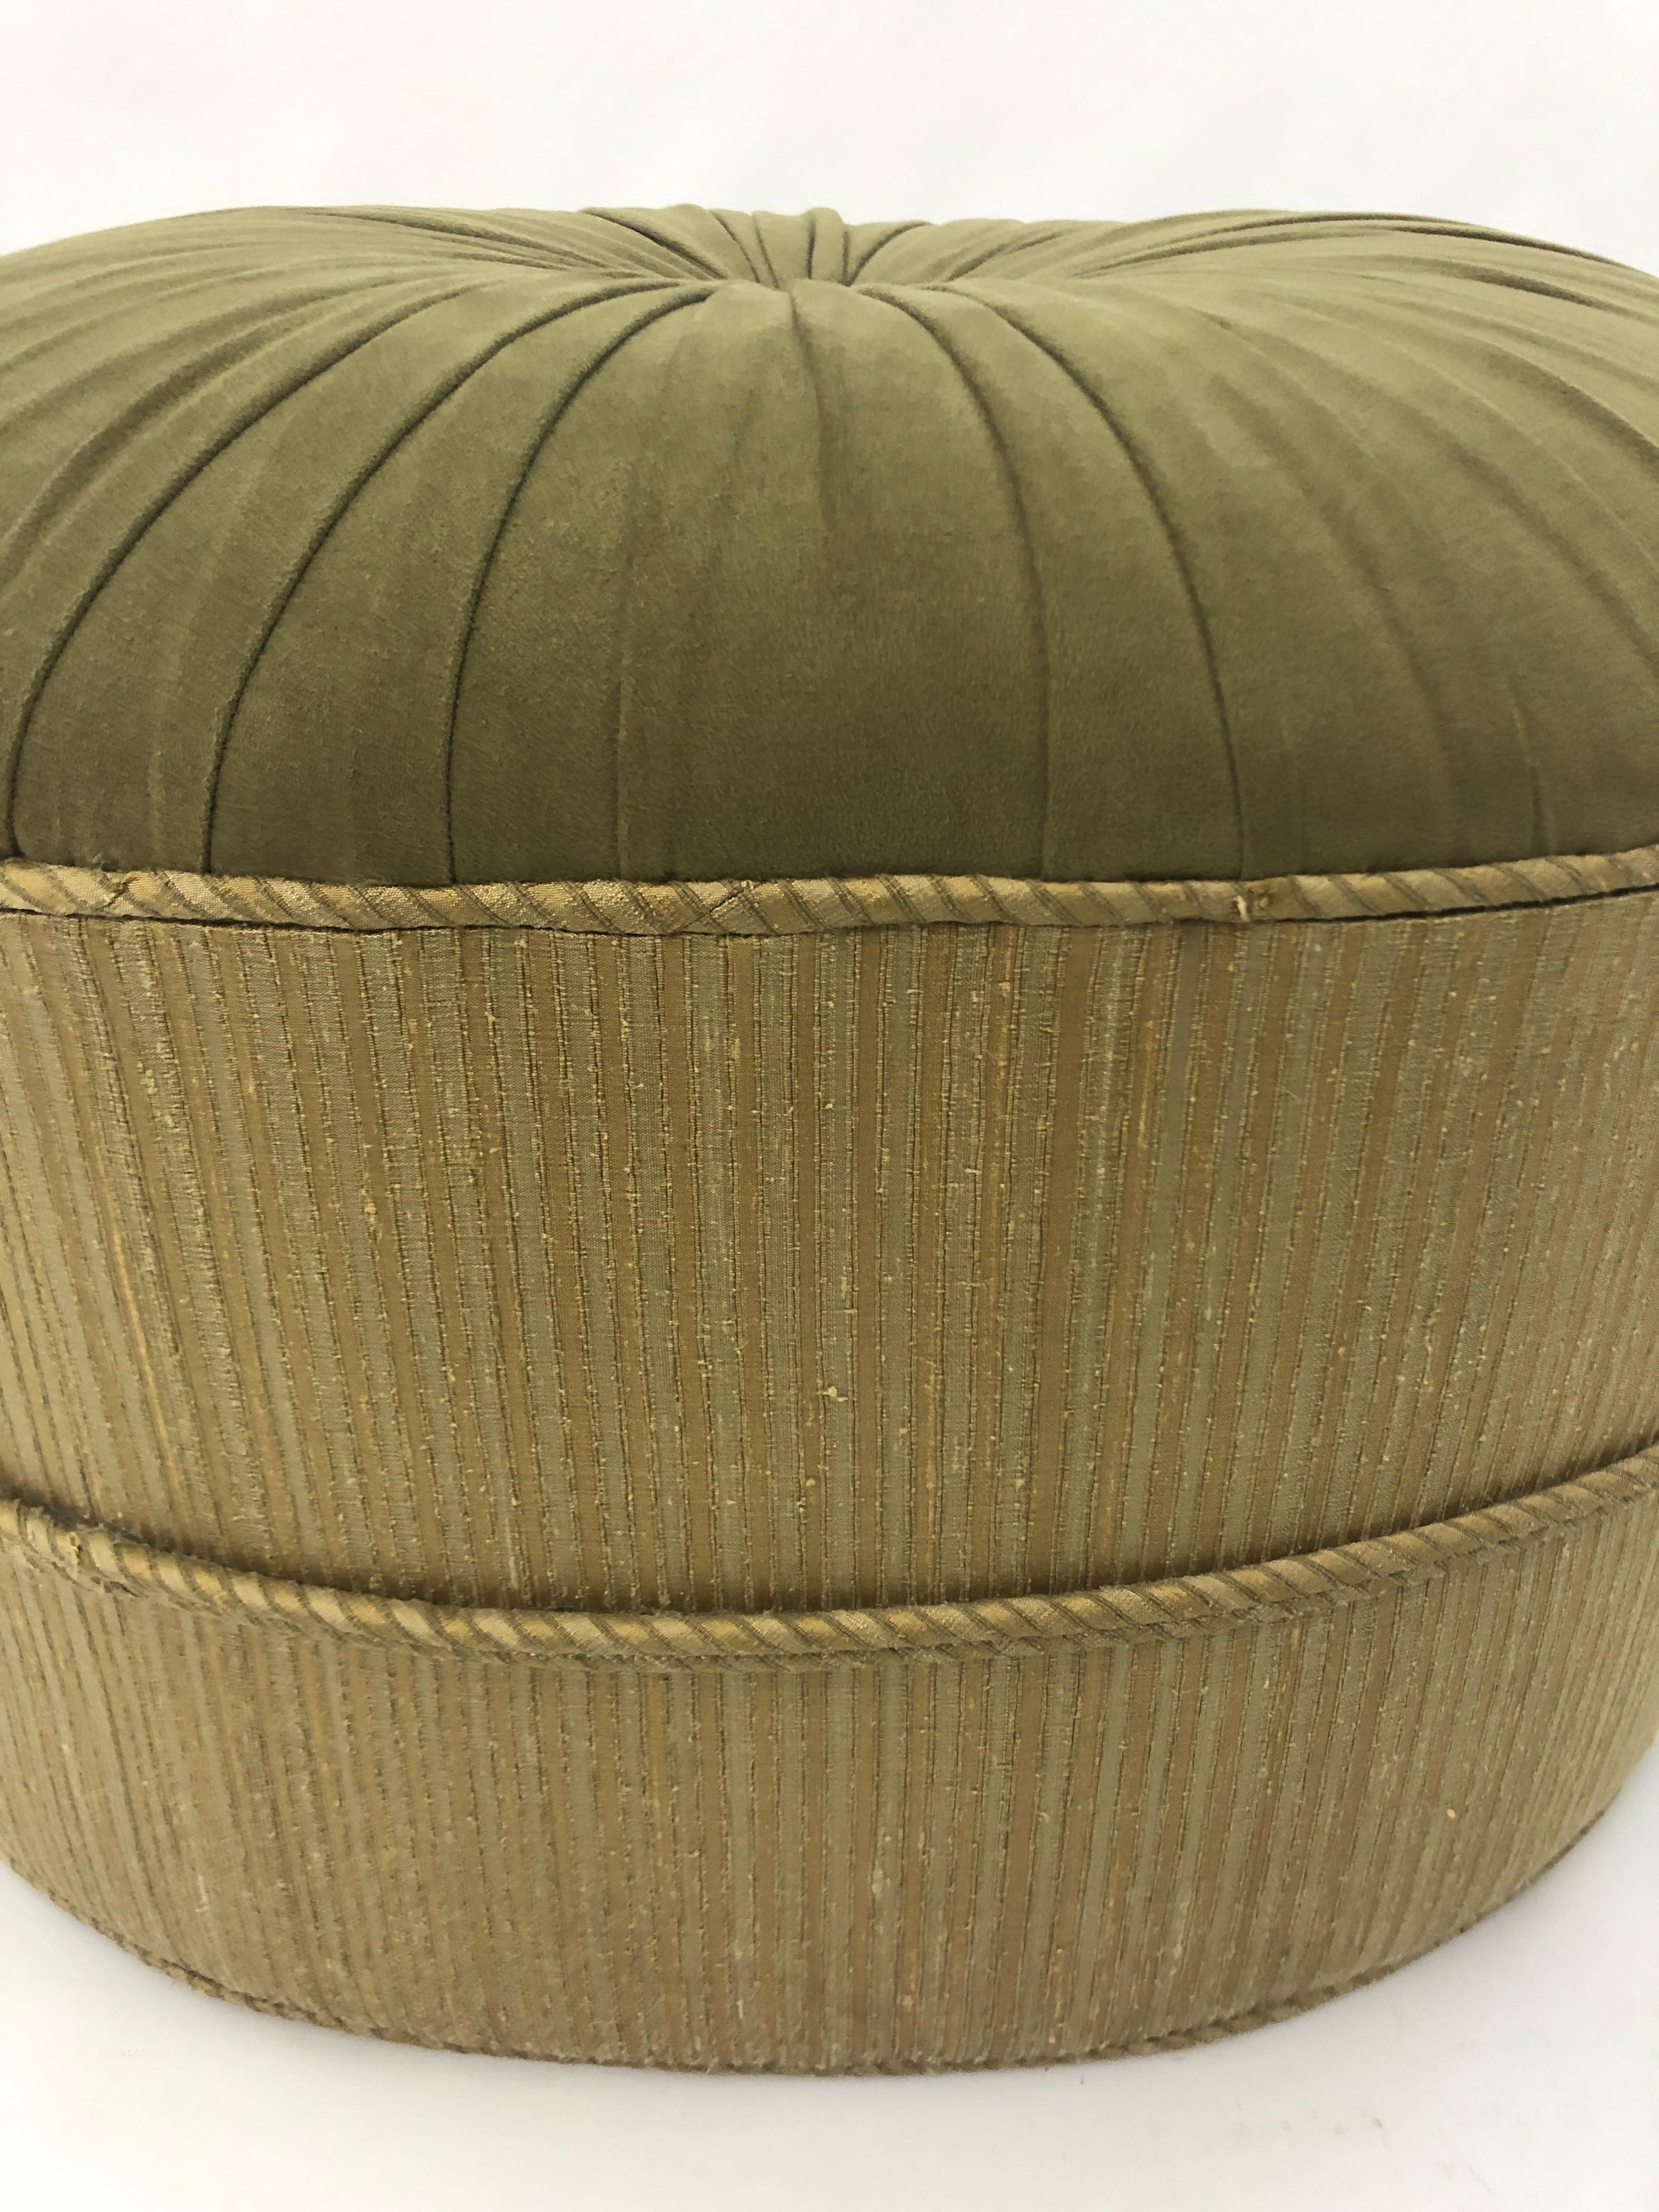 A stylish oval pouf or ottoman in a wonderful olive green ultrasuede having single button and pleating on top and a lighter color of greenish taupe around the periphery.